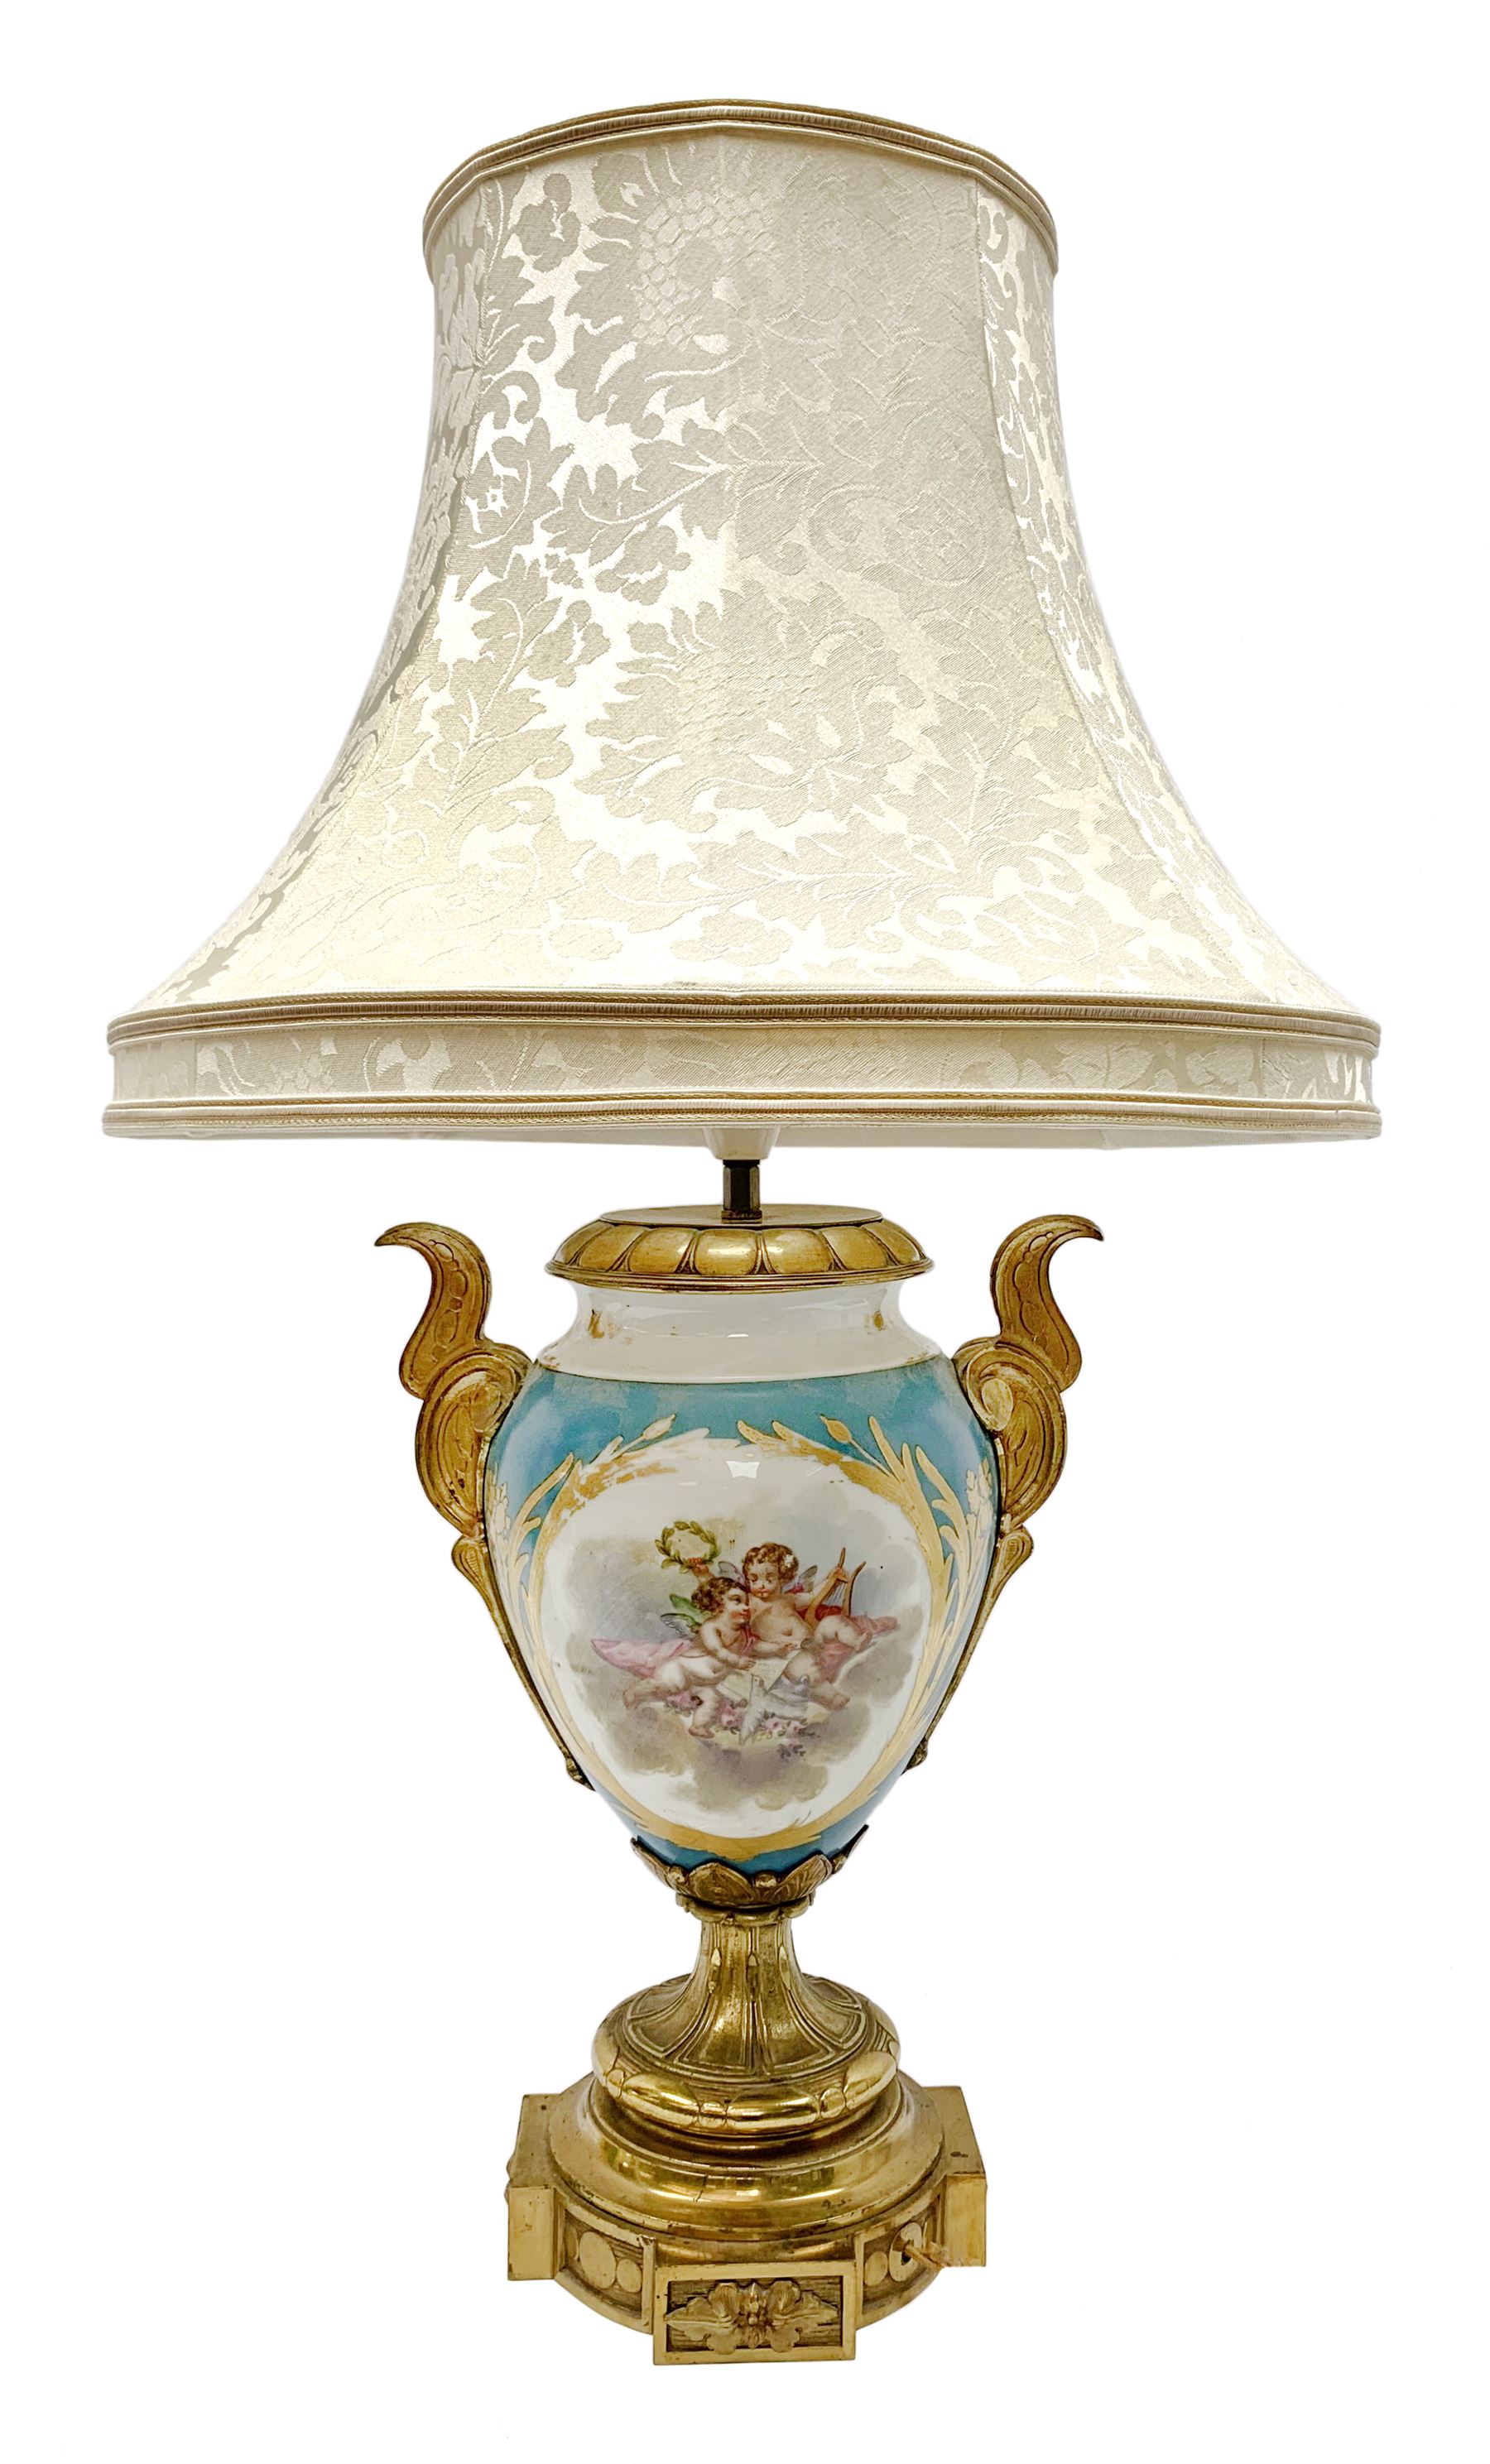 Sevres style table lamp